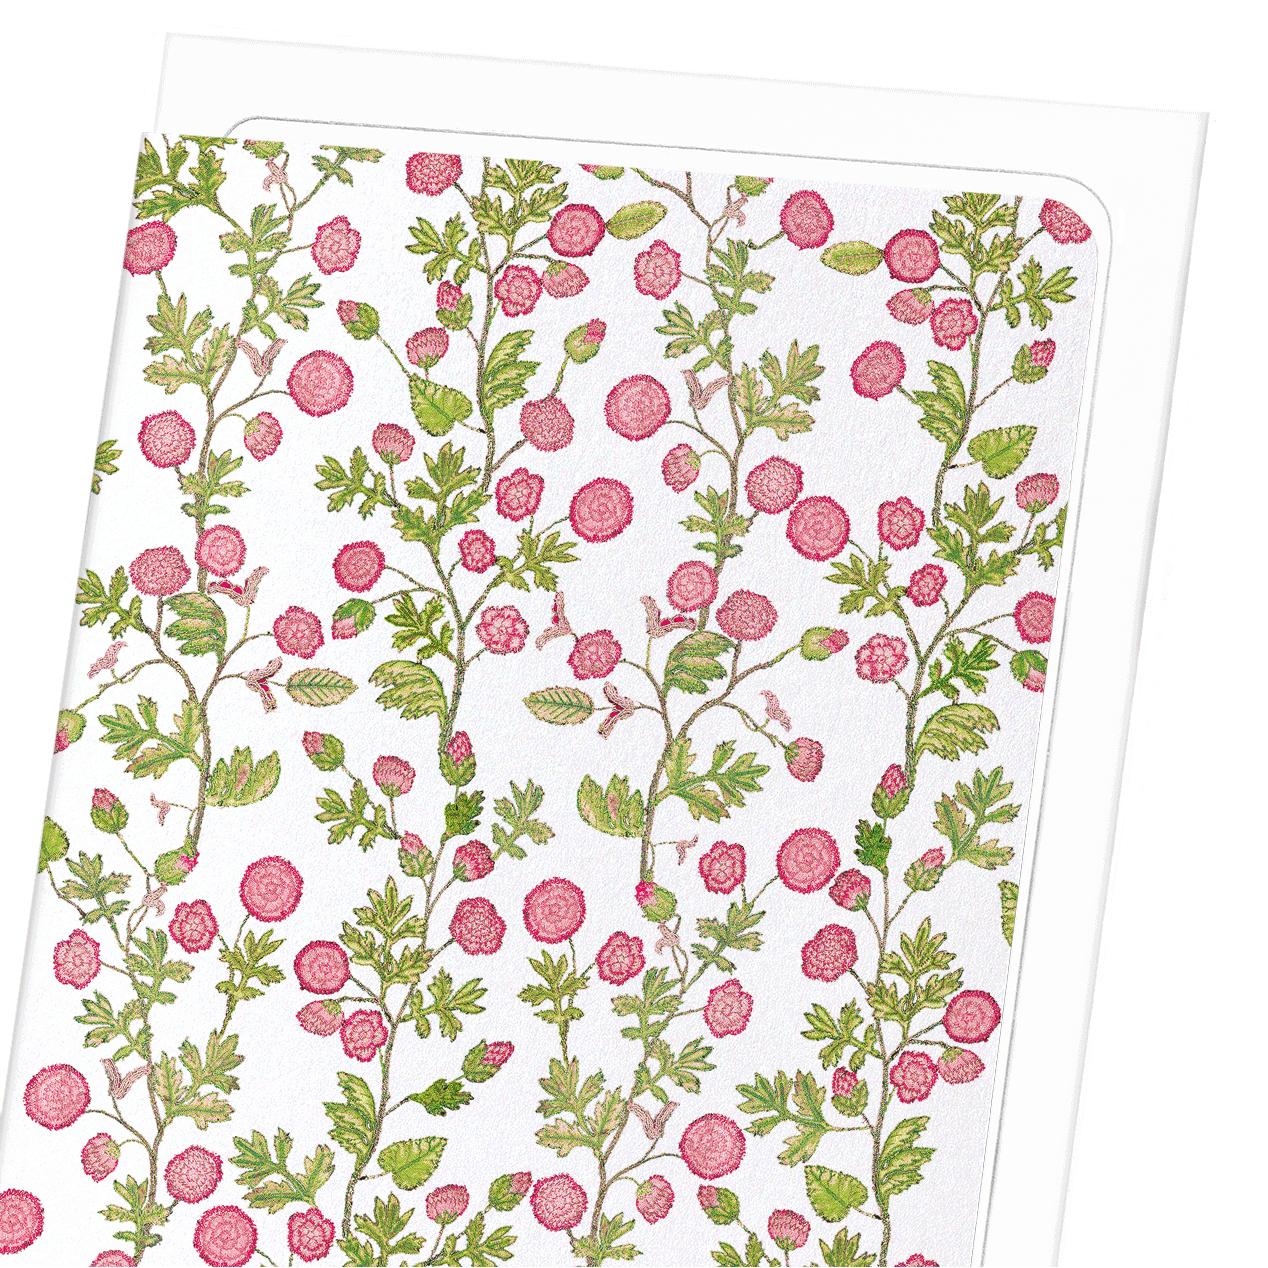 TUDOR EMBROIDERY OF ROSES ON WHITE (16TH C.): Pattern Greeting Card